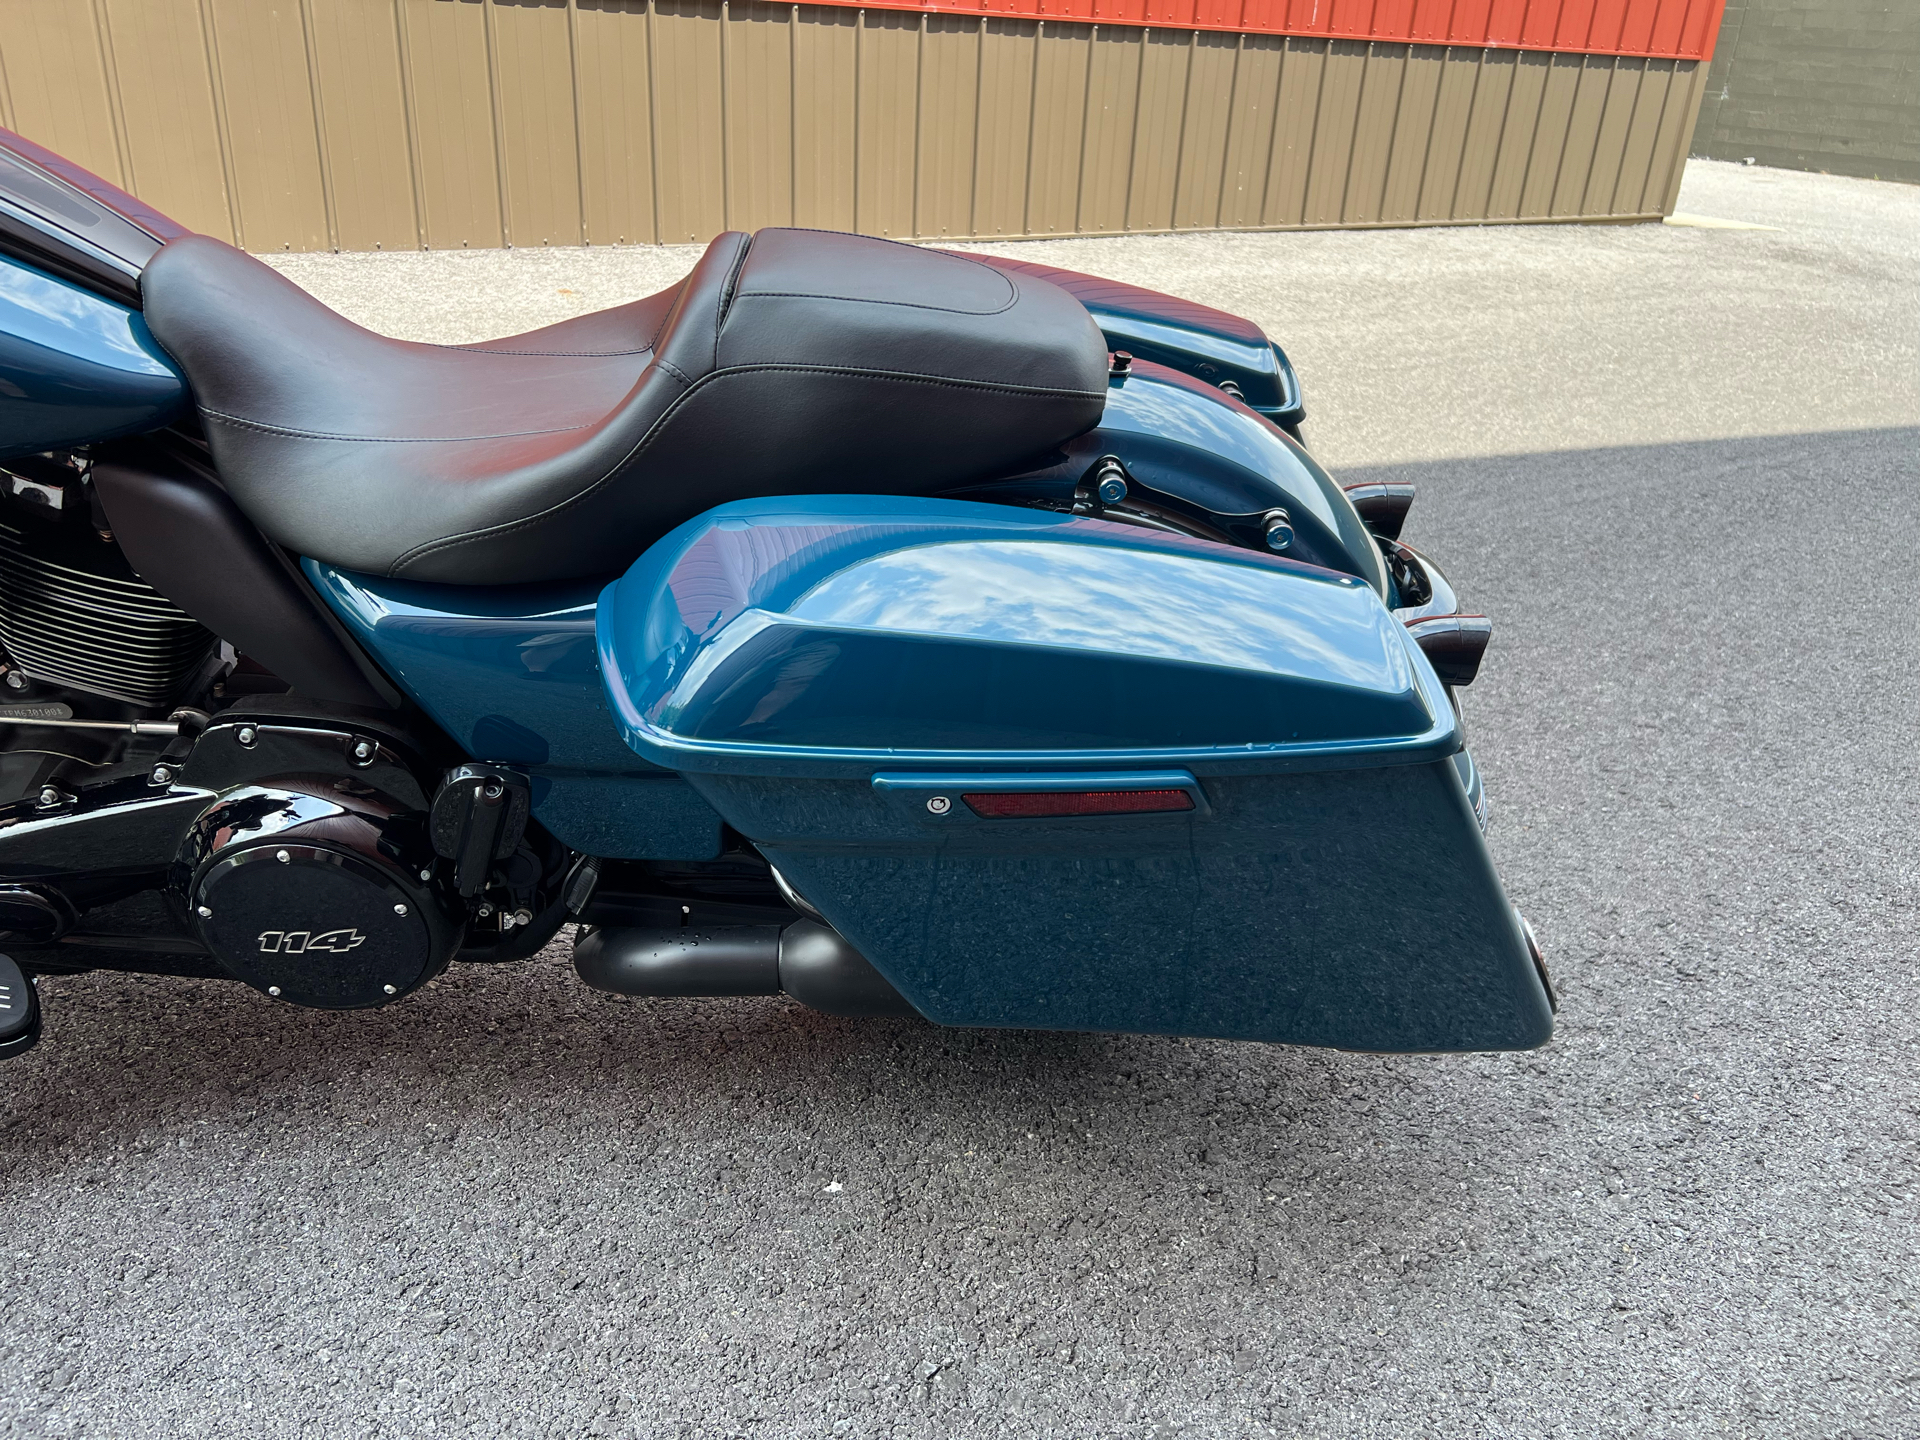 2021 Harley-Davidson Road Glide® Special in Tyrone, Pennsylvania - Photo 11